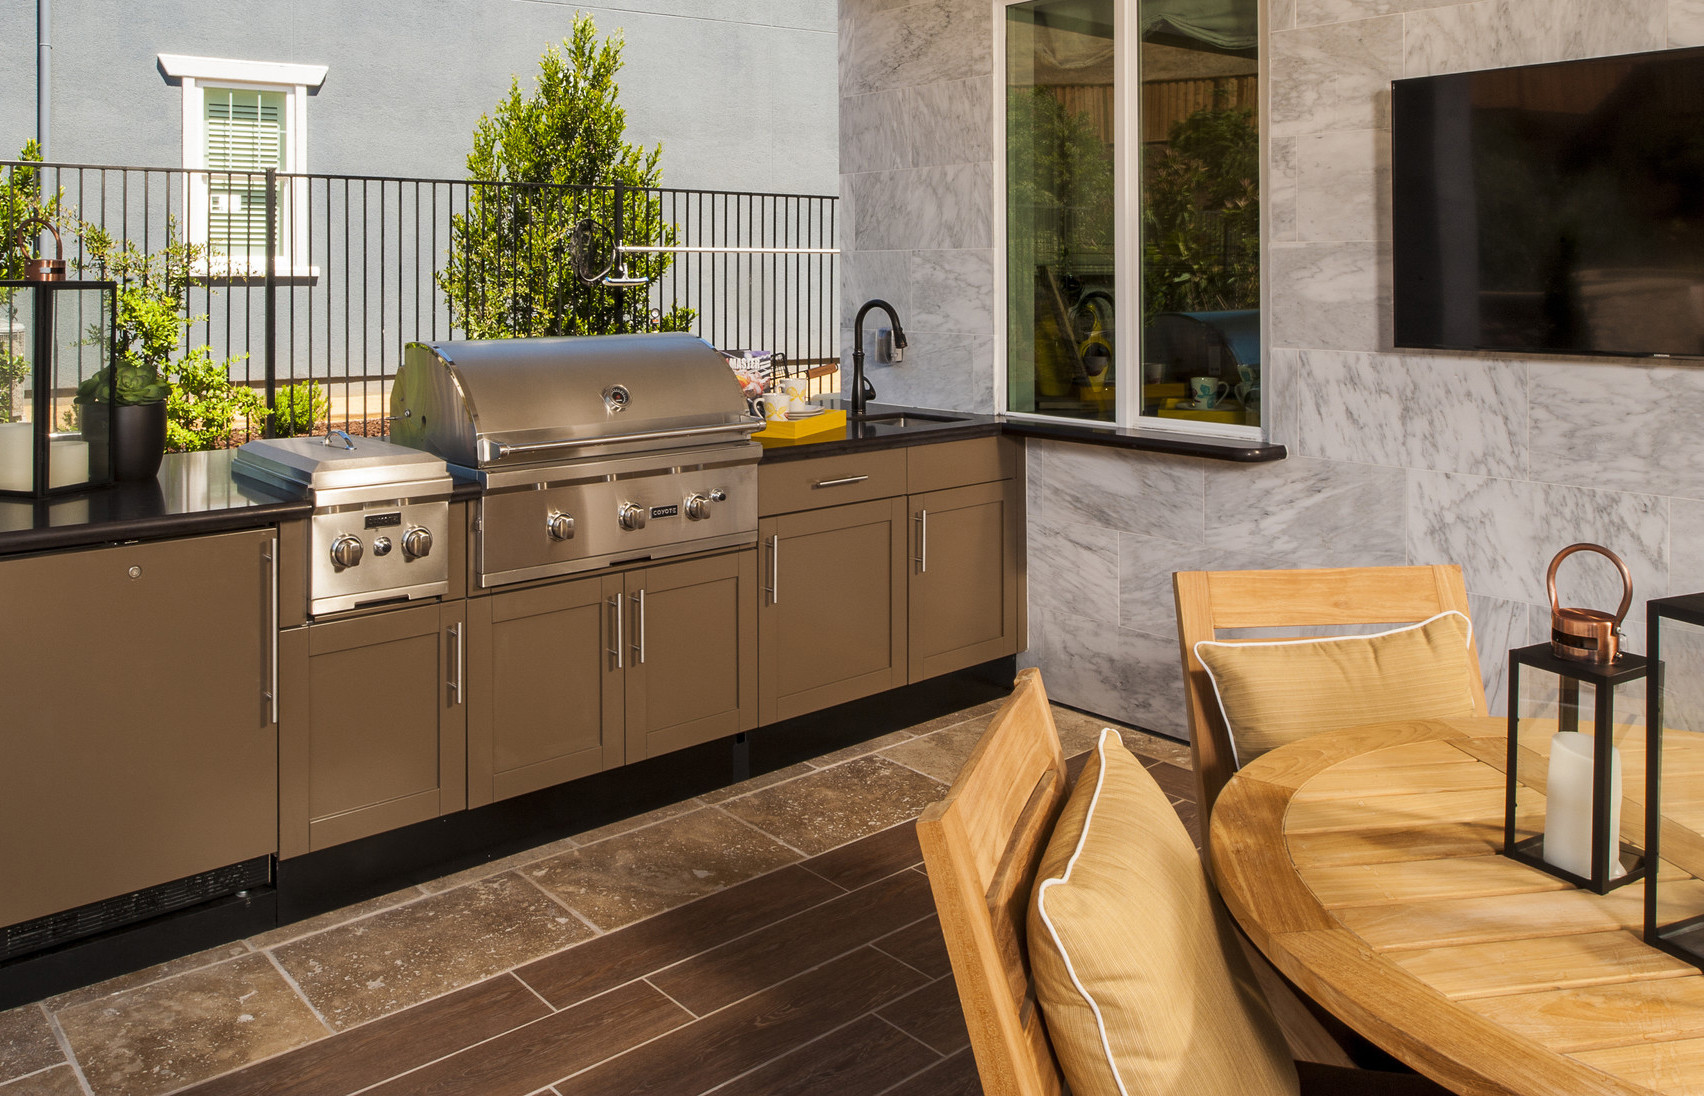 Stainless Steel Outdoor Kitchen Cabinets
 Stainless Steel Base Cabinets for Outdoor Kitchens